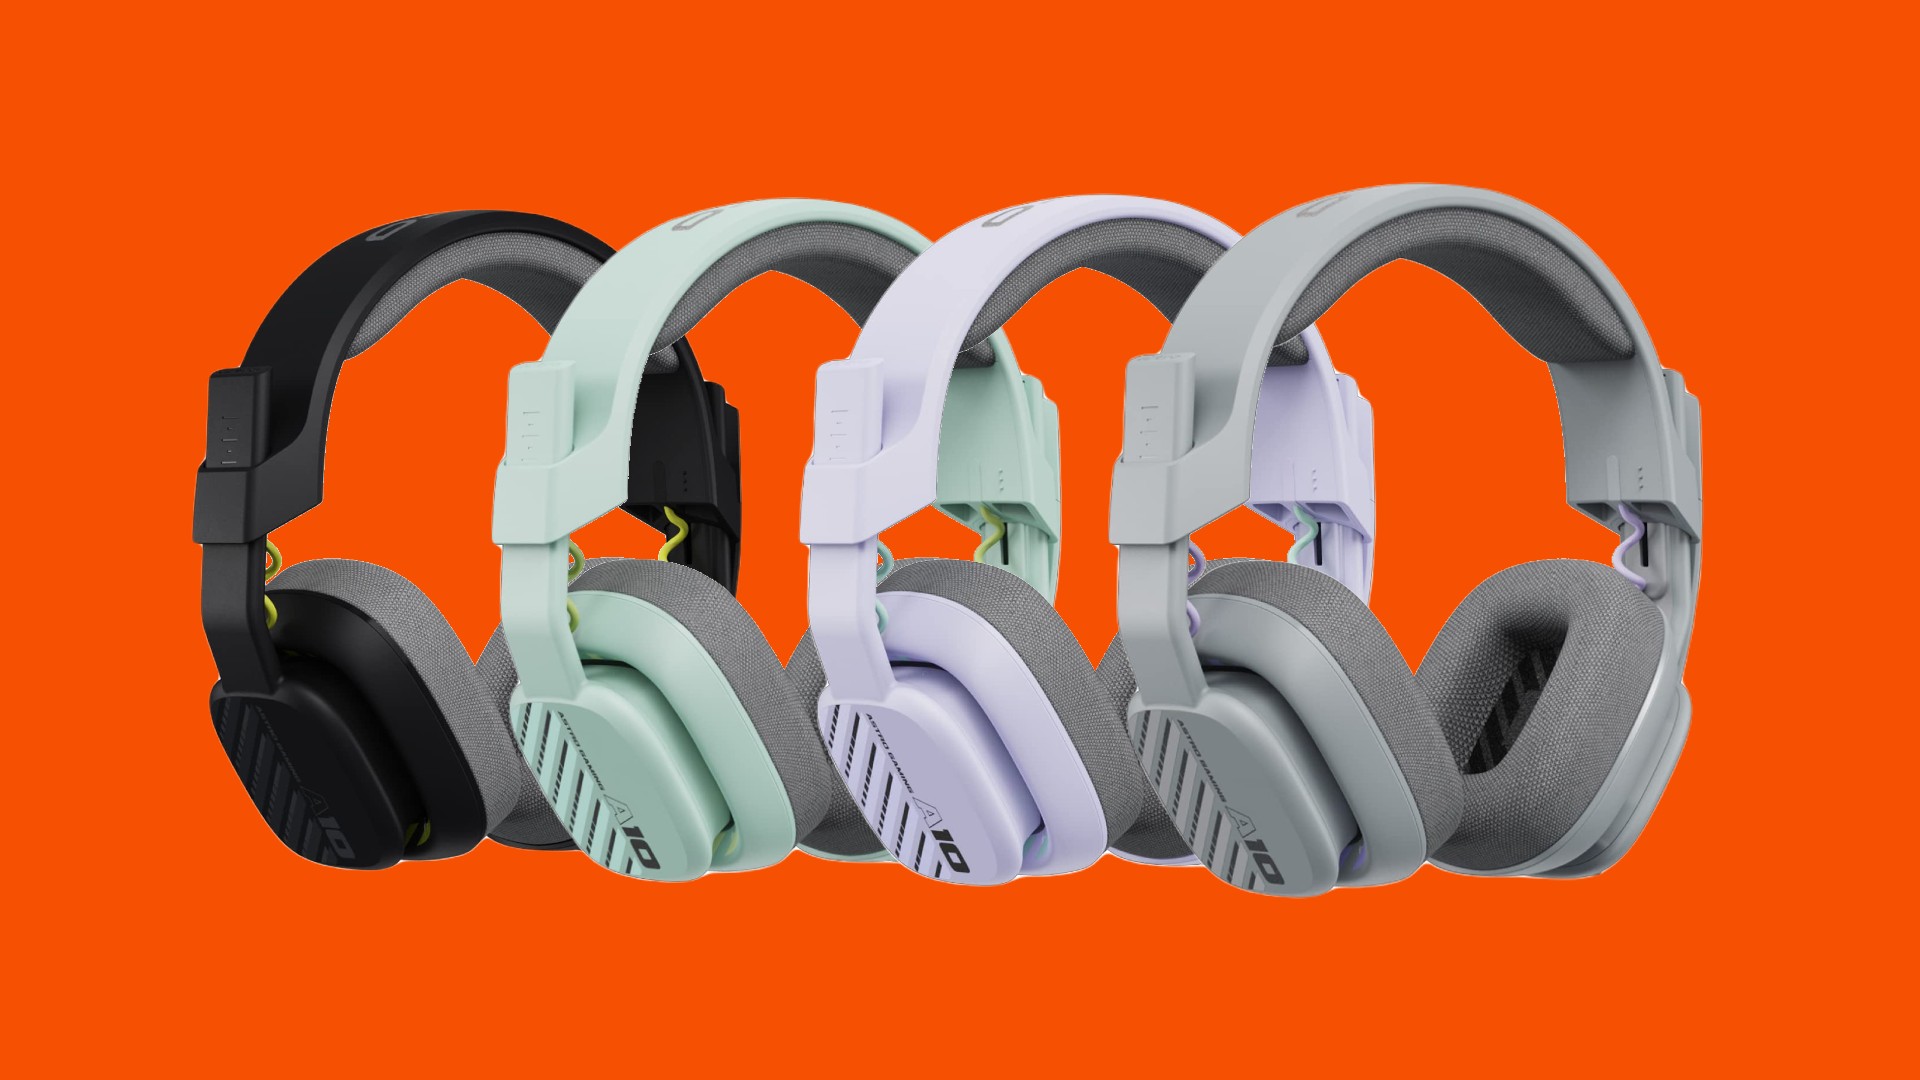 Grab a colorful Astro gaming headset right now in limited time deal